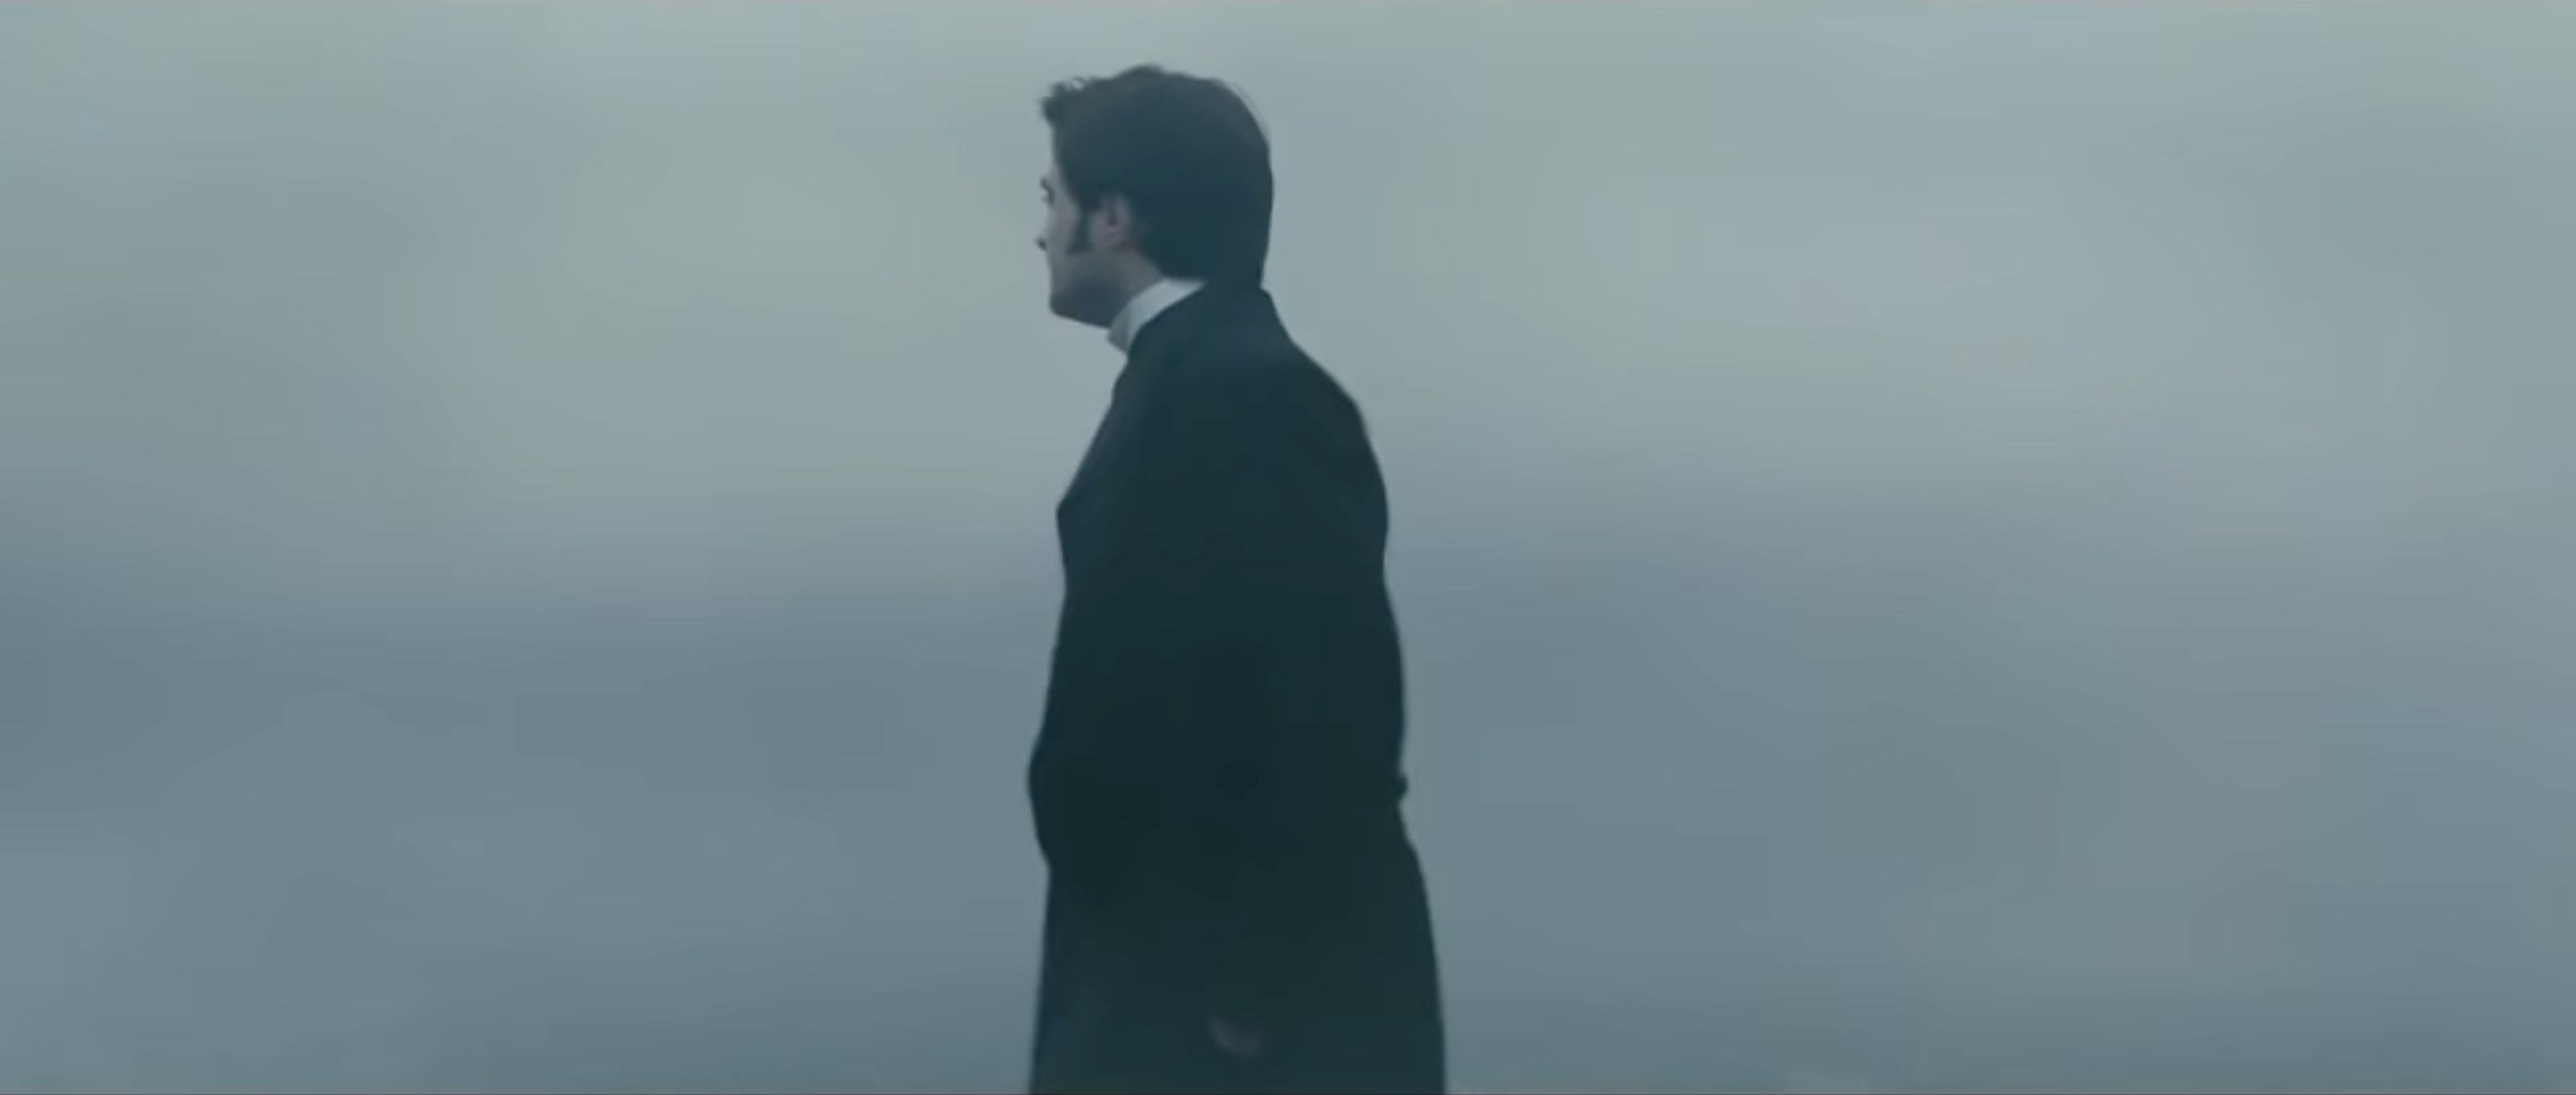 A man standing against a misty backdrop